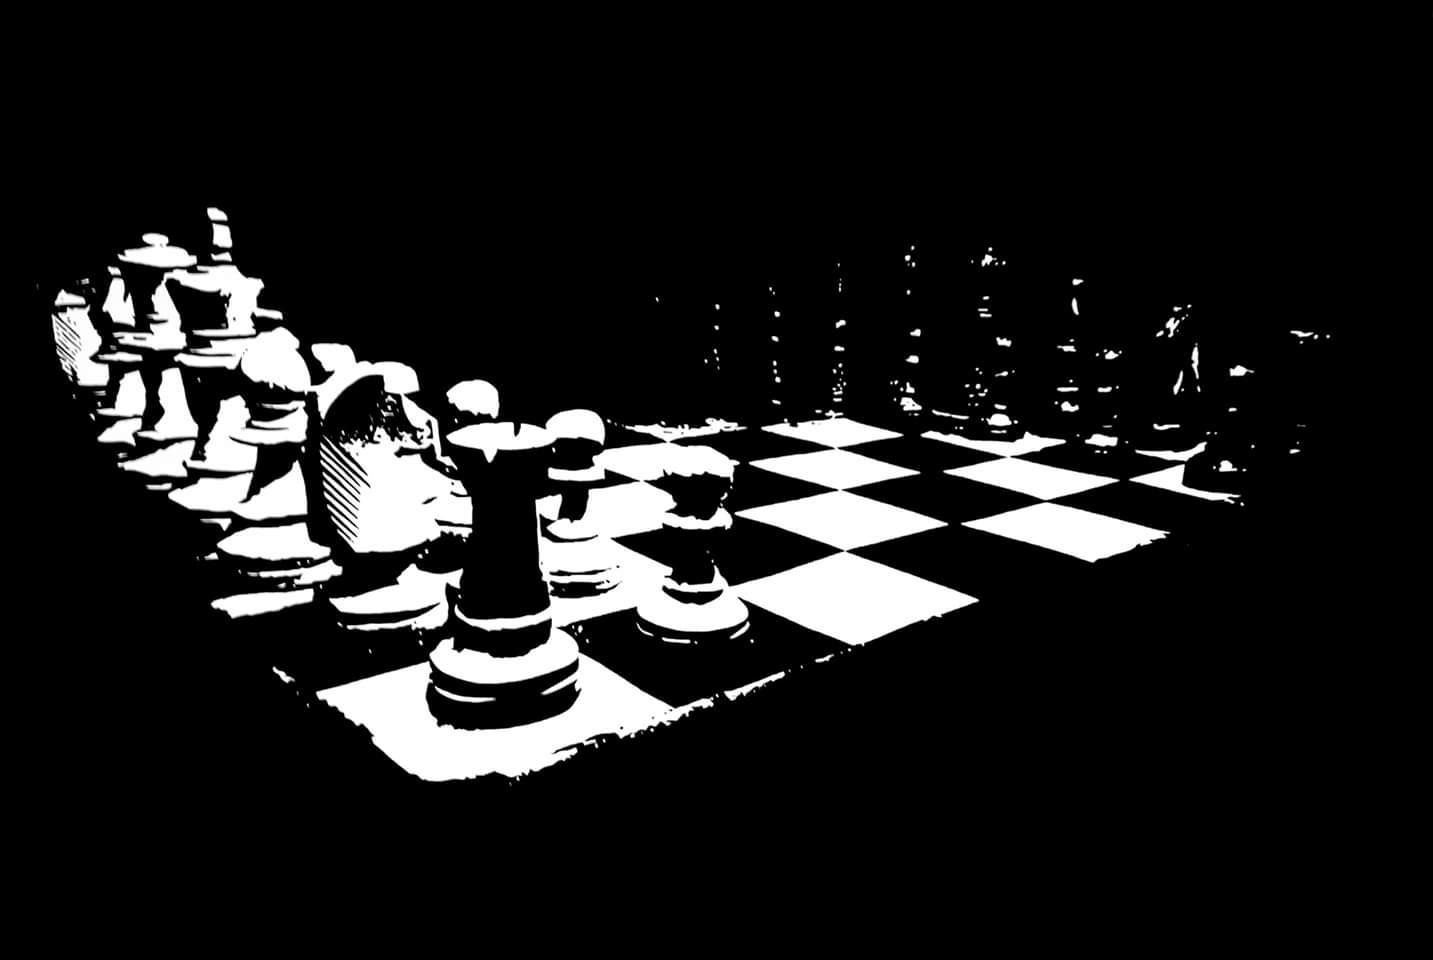 ▷ Chess pieces: Know how to move the 5 pieces of this great game.